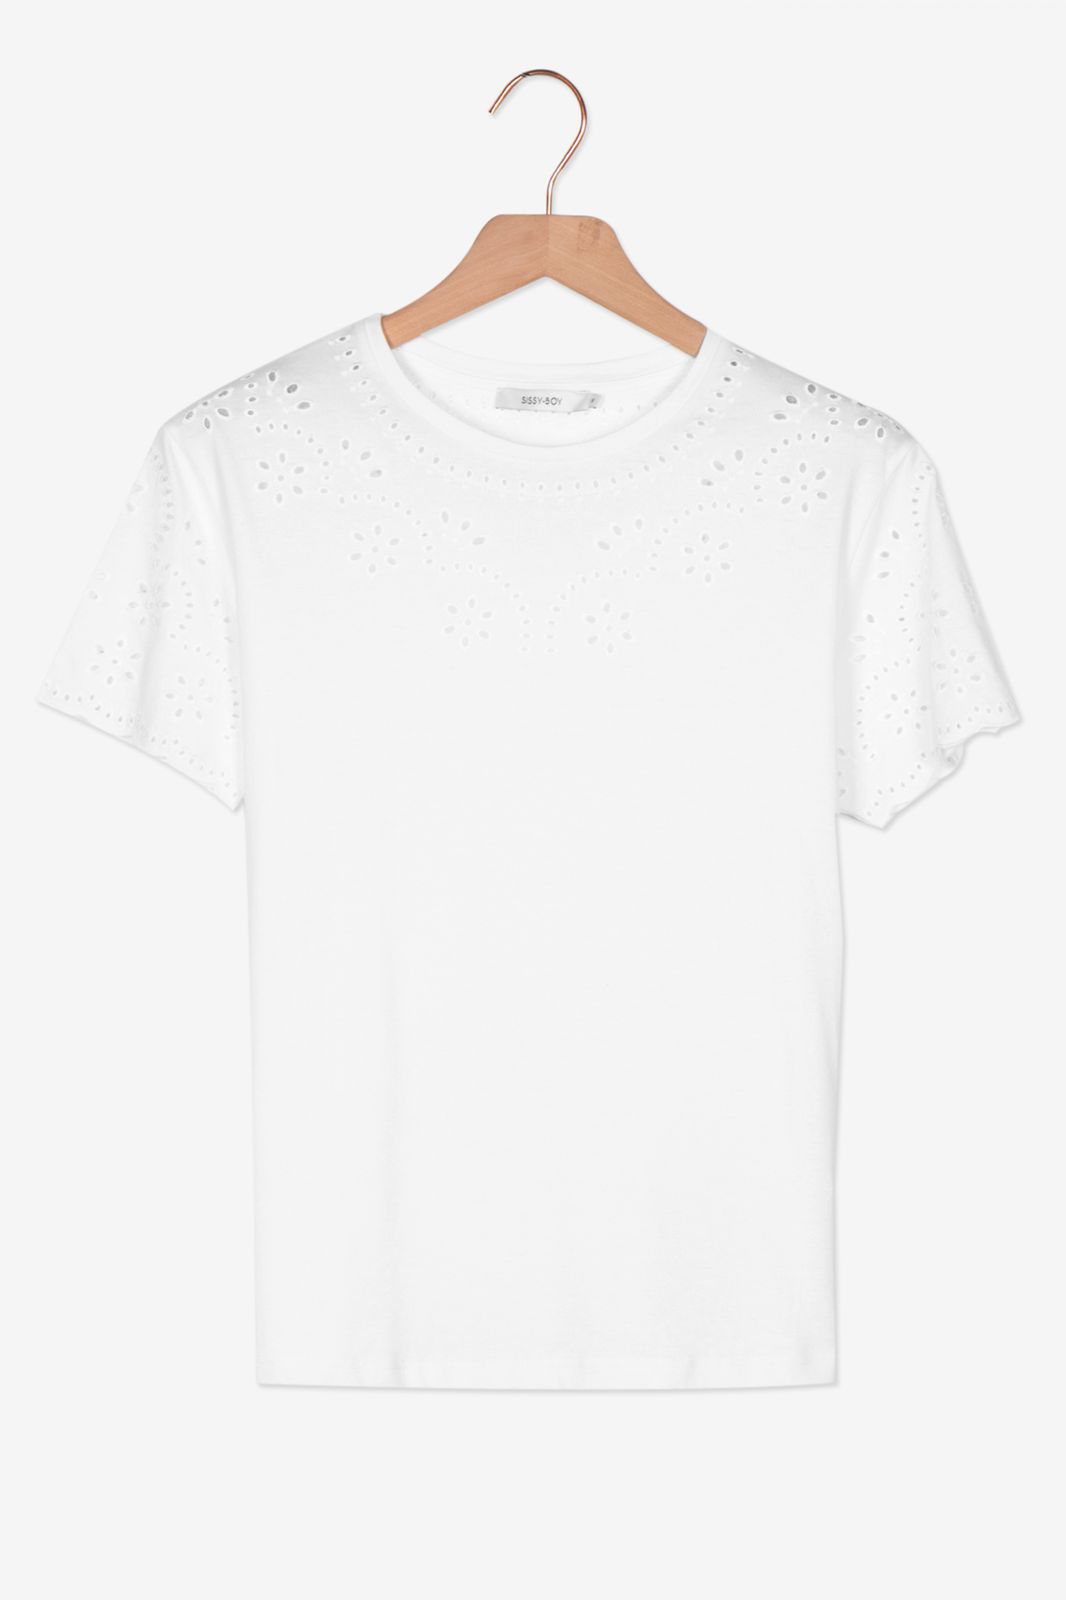 Consequent Woud twintig Wit T-shirt broderie - Dames | Sissy-Boy